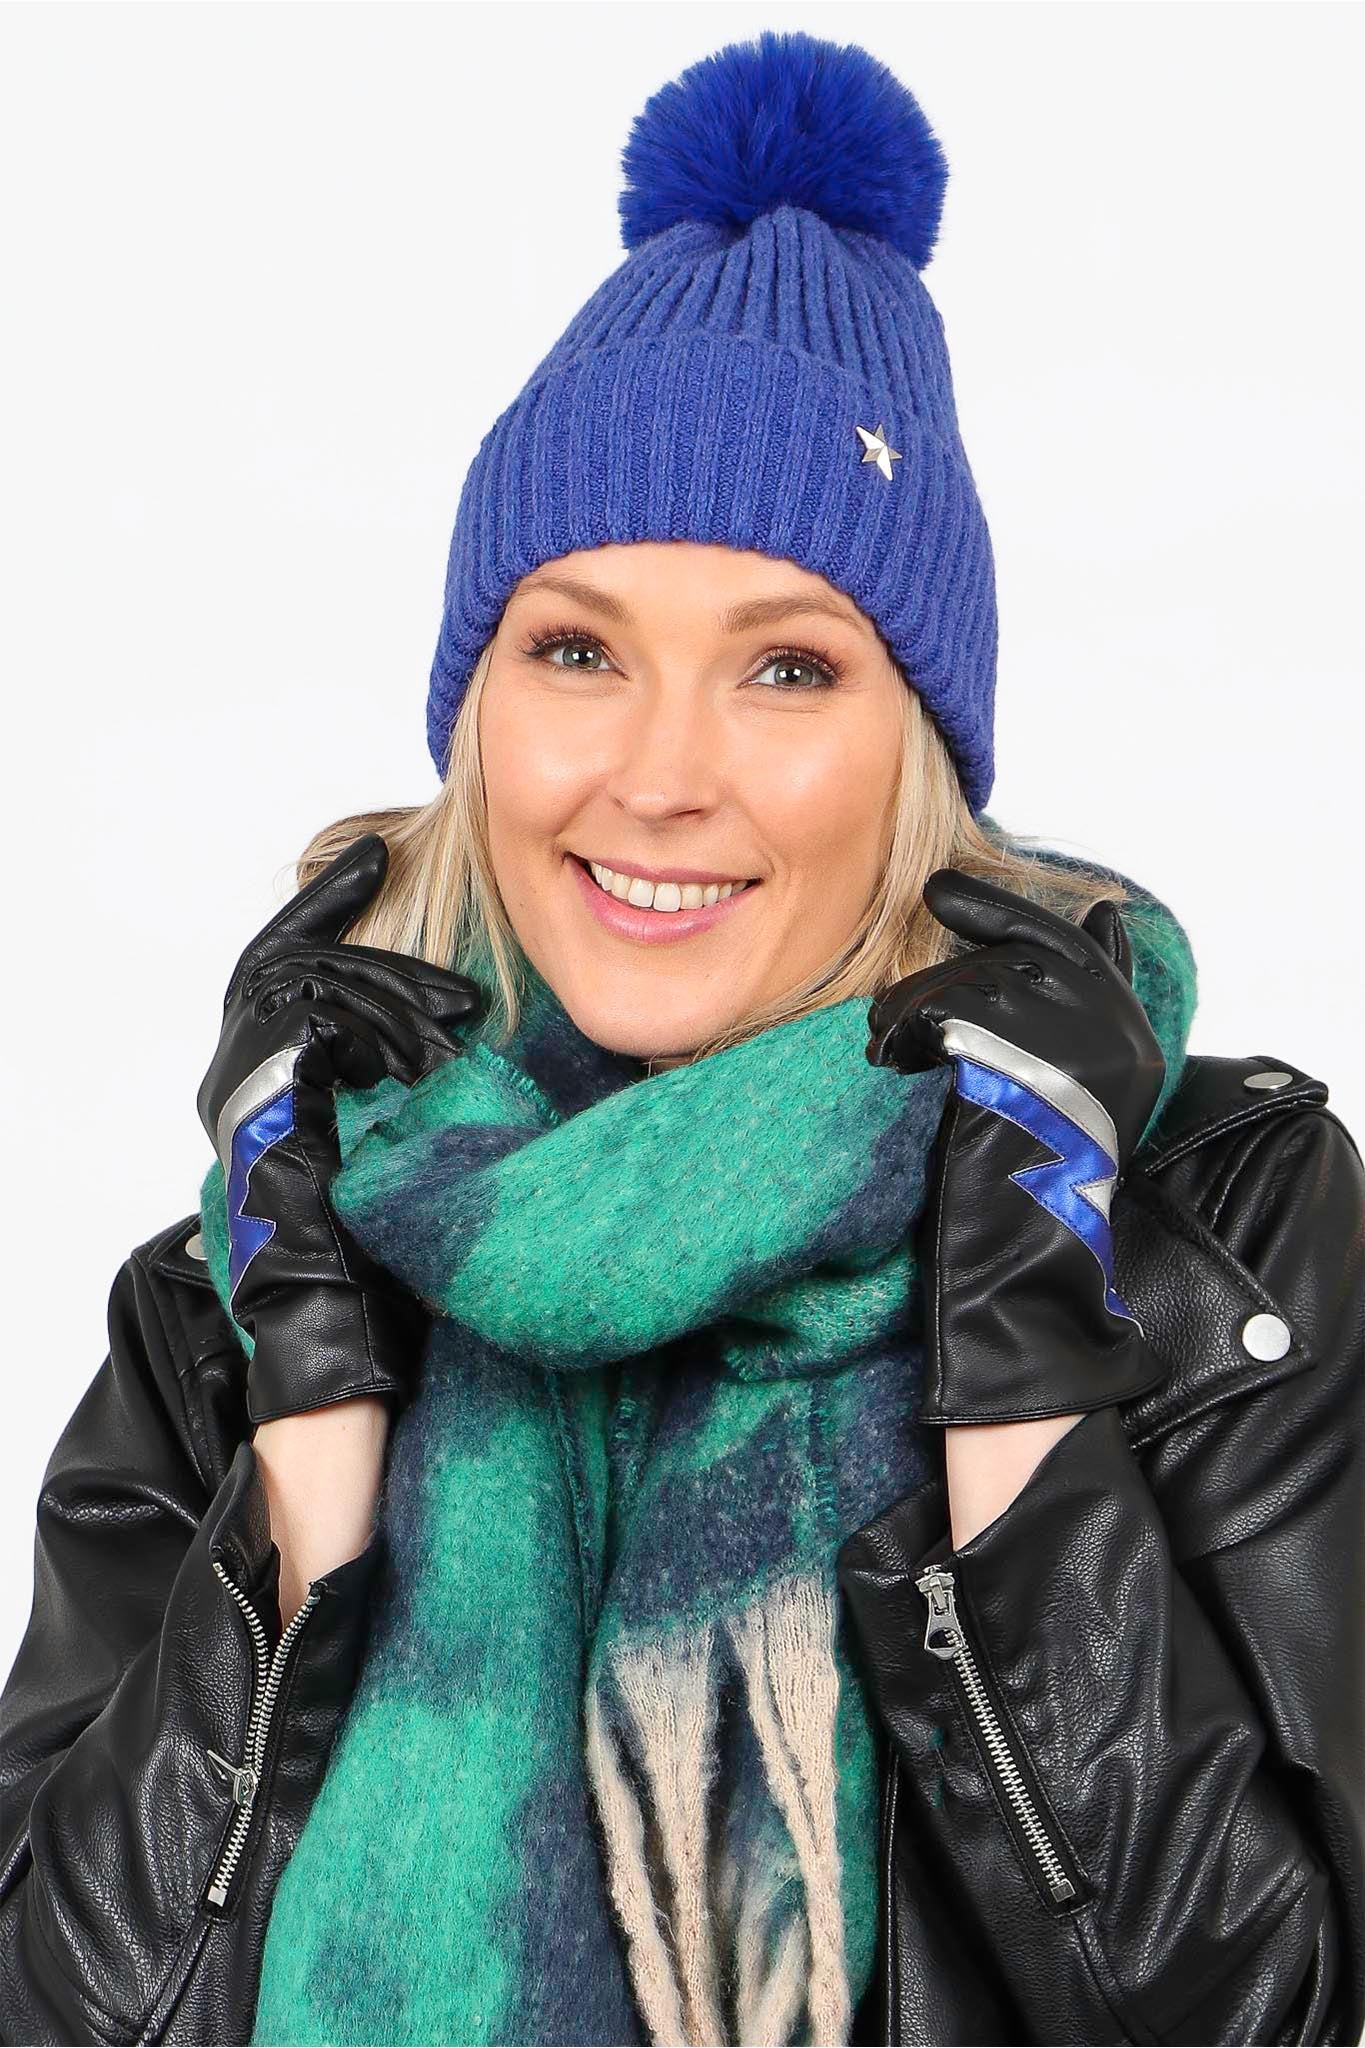 model wearing the black and blue lightning bolt gloves and other matching winter accessories